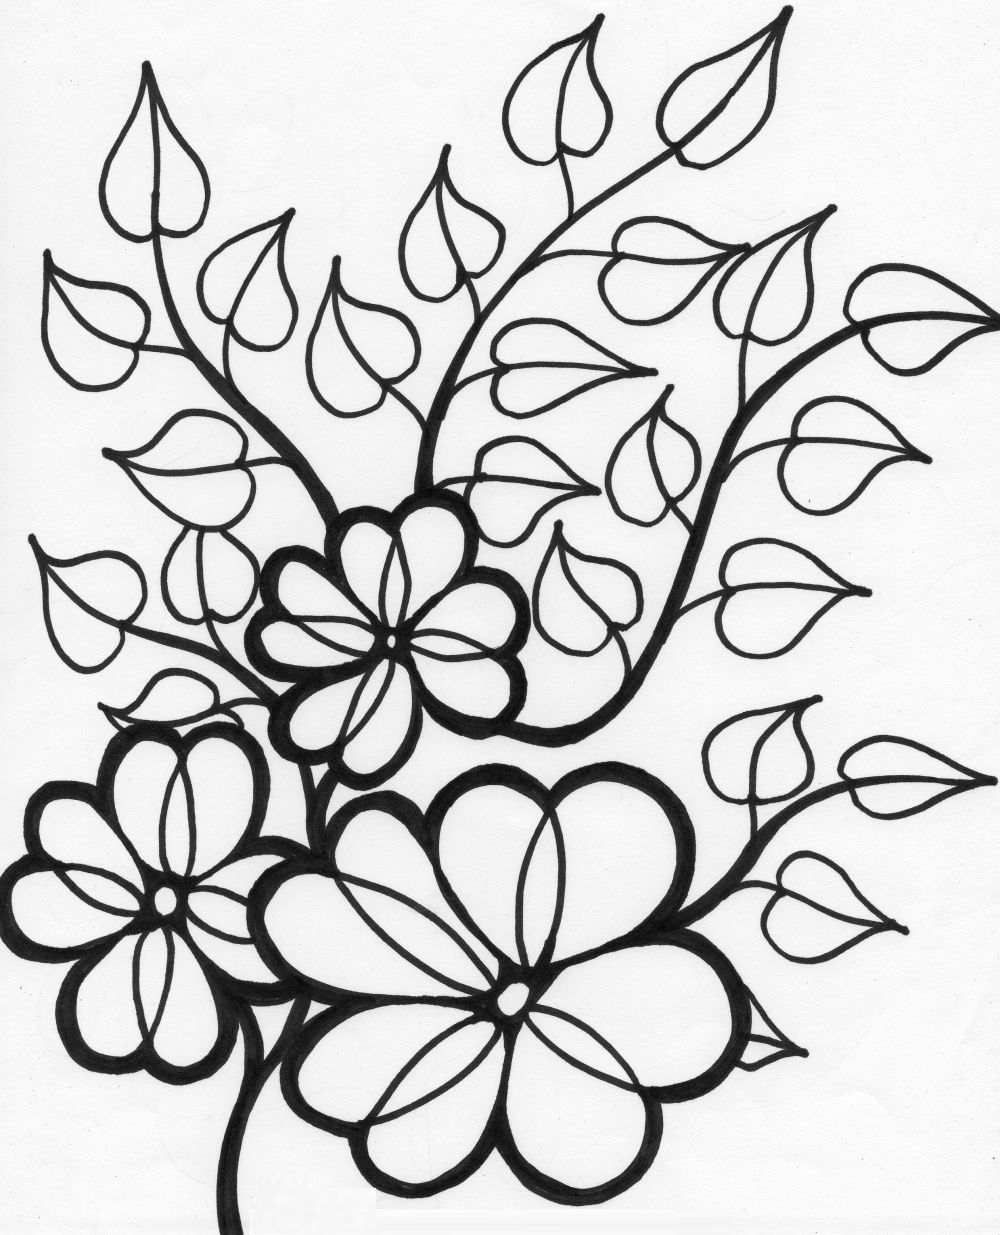 Flowers Coloring Pages Free Printable   Coloring Pages For Kids ...